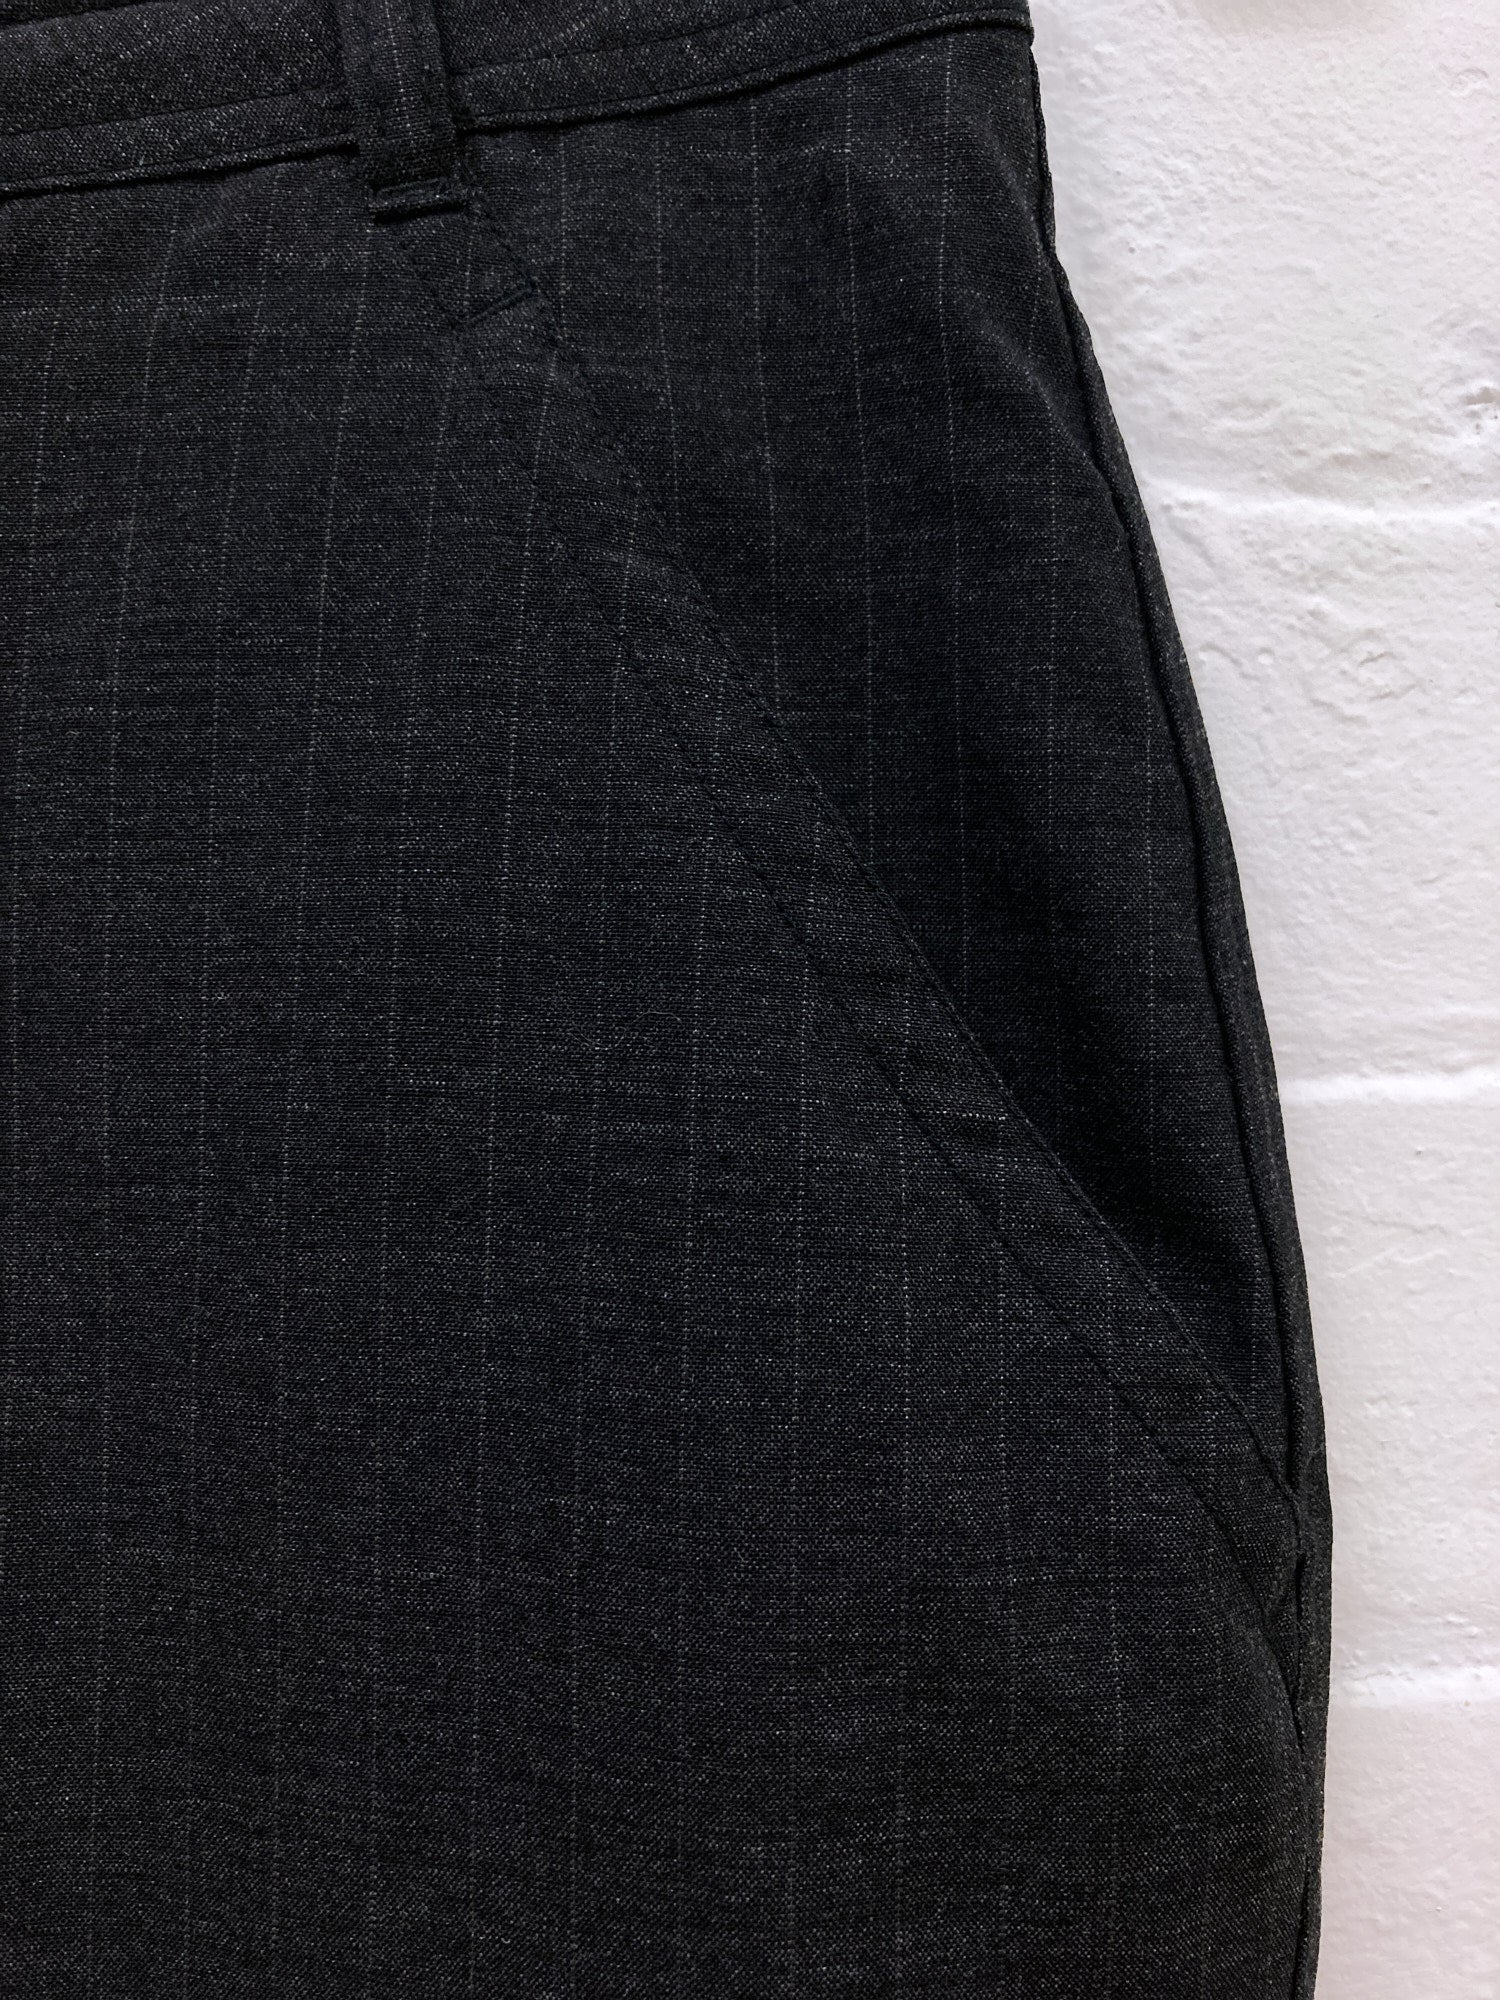 Comme des Garcons 1997 dark grey wool striped skirt resembling trousers - M